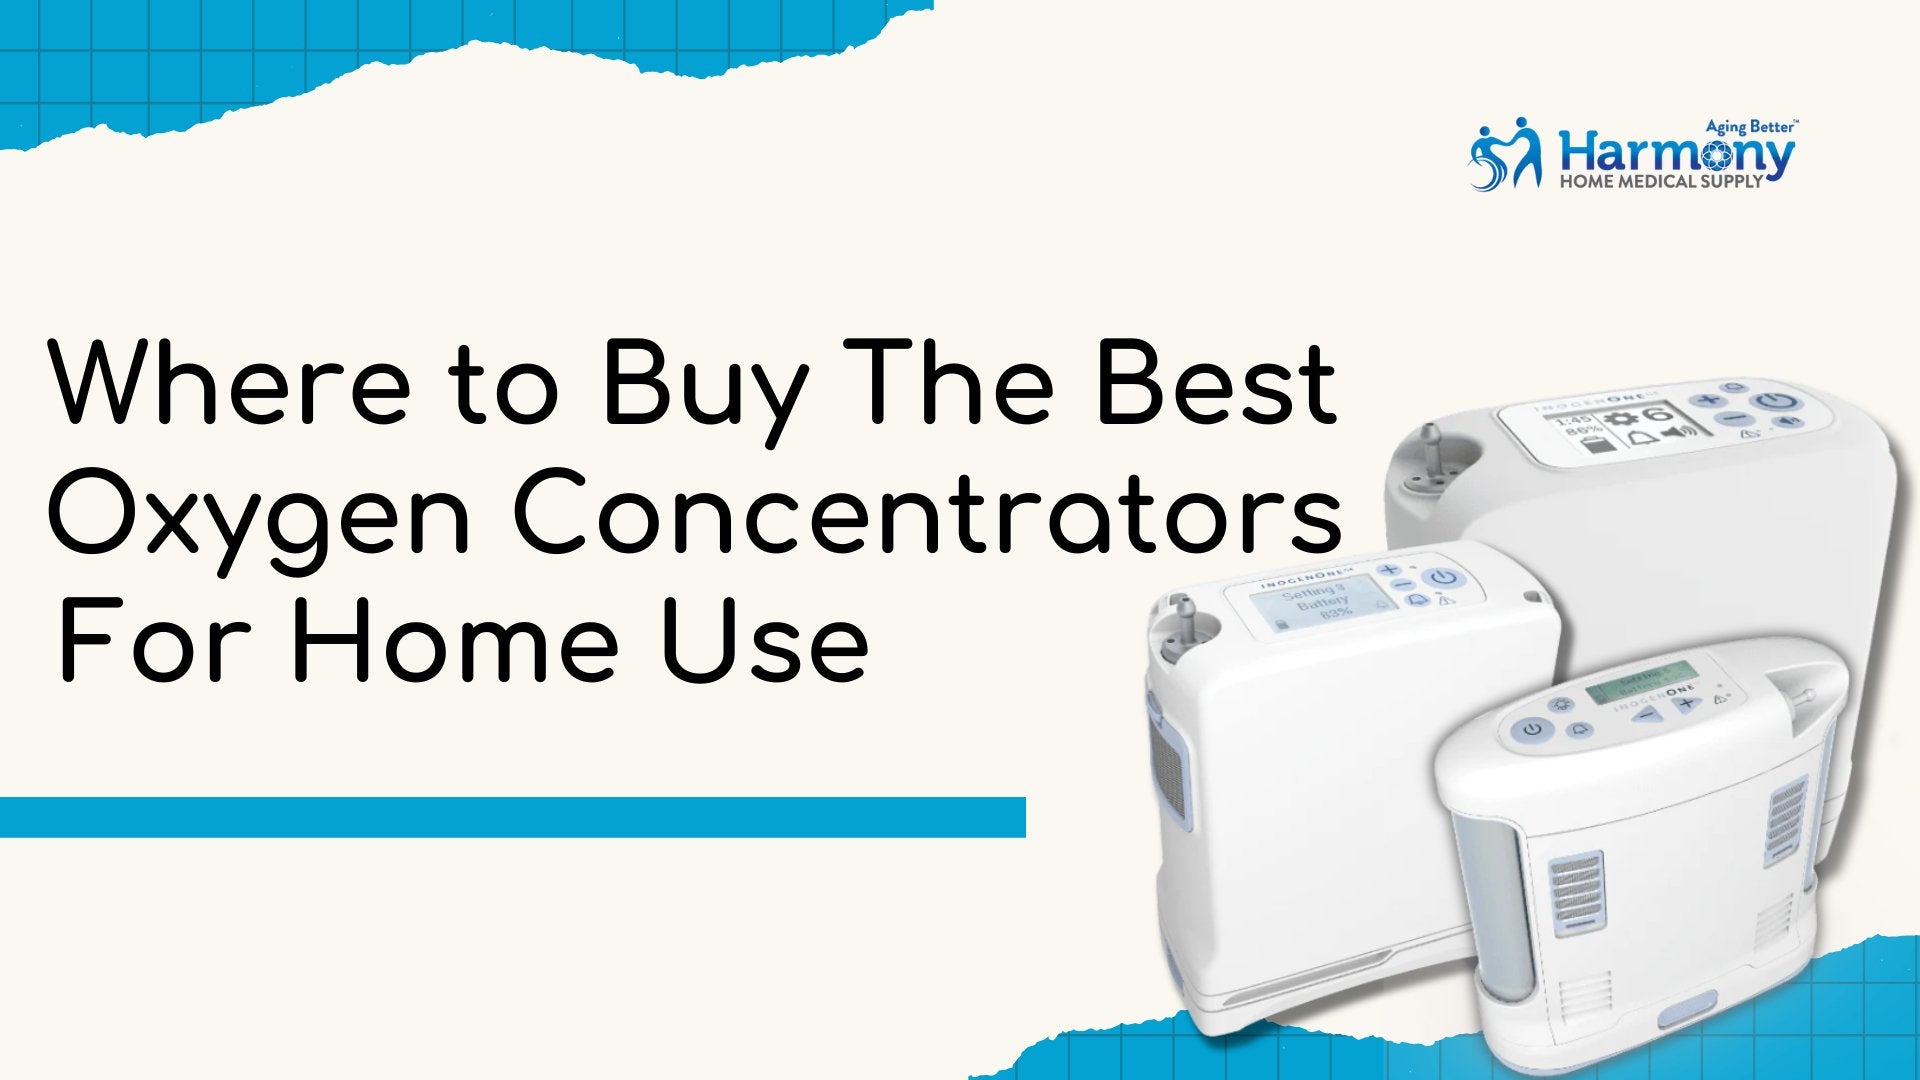 Where to Buy The Best Oxygen Concentrator for Home Use?